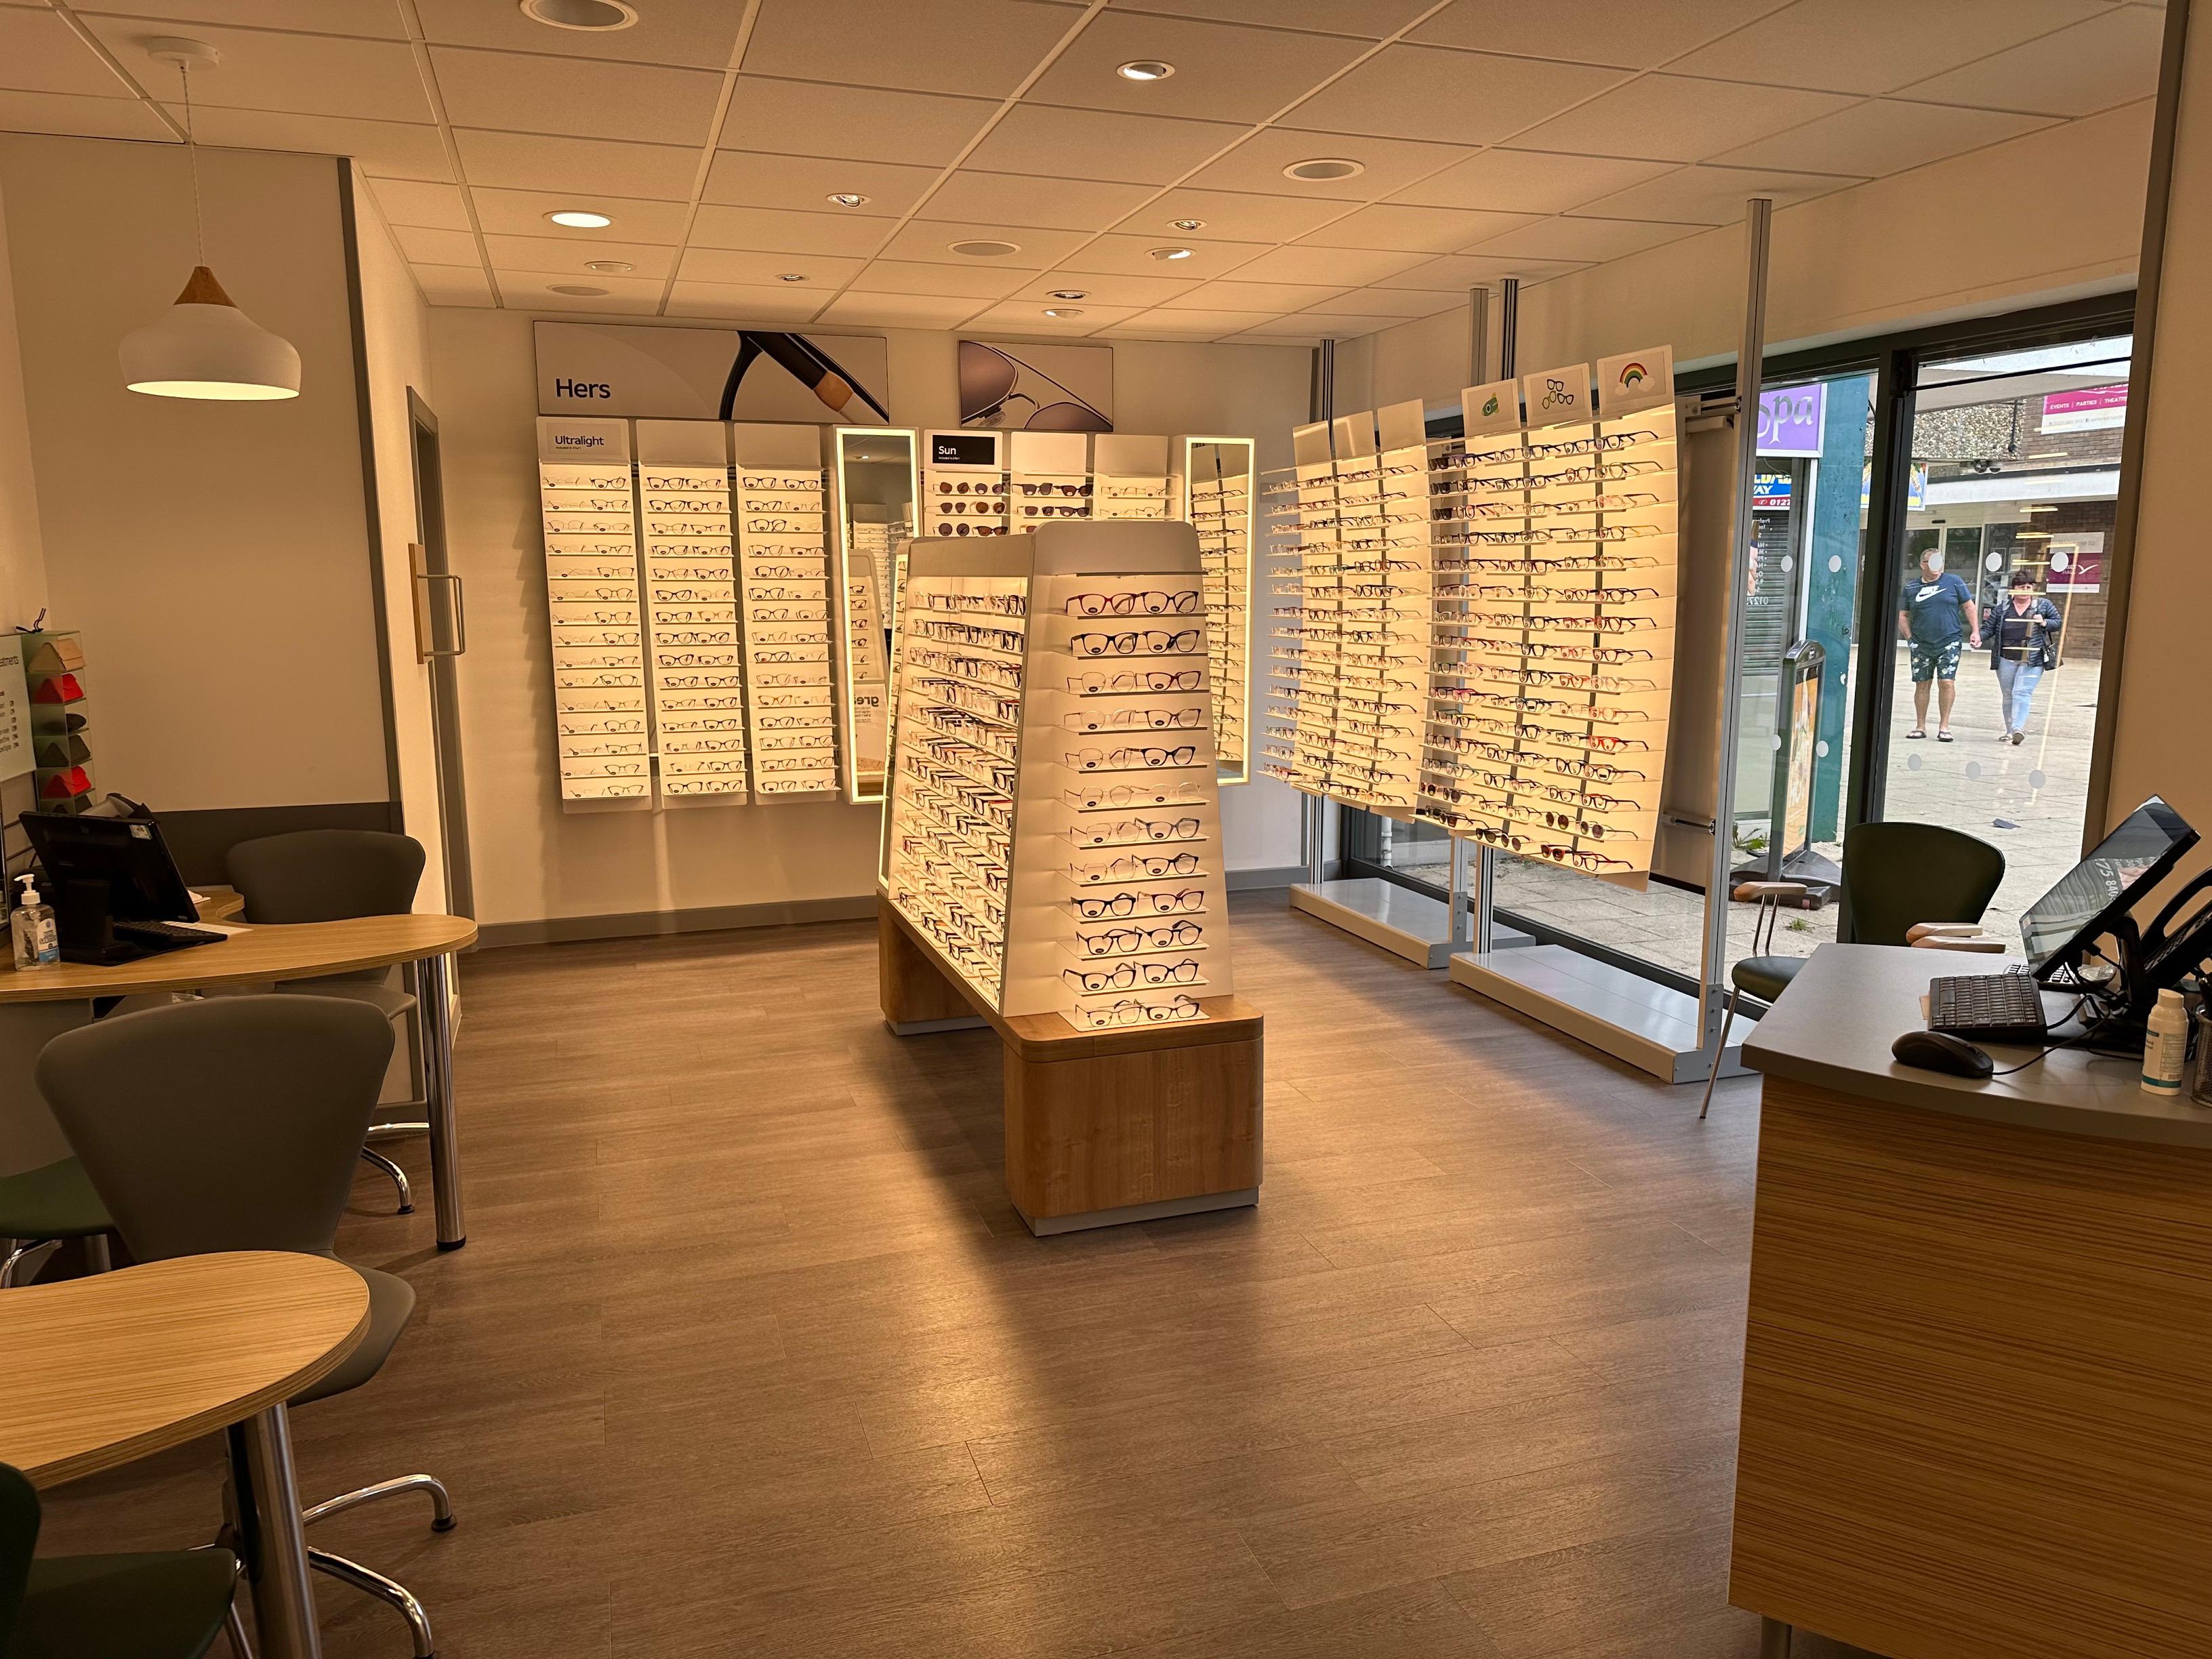 Portishead Specsavers Specsavers Opticians and Audiologists - Portishead Portishead 01275 845118